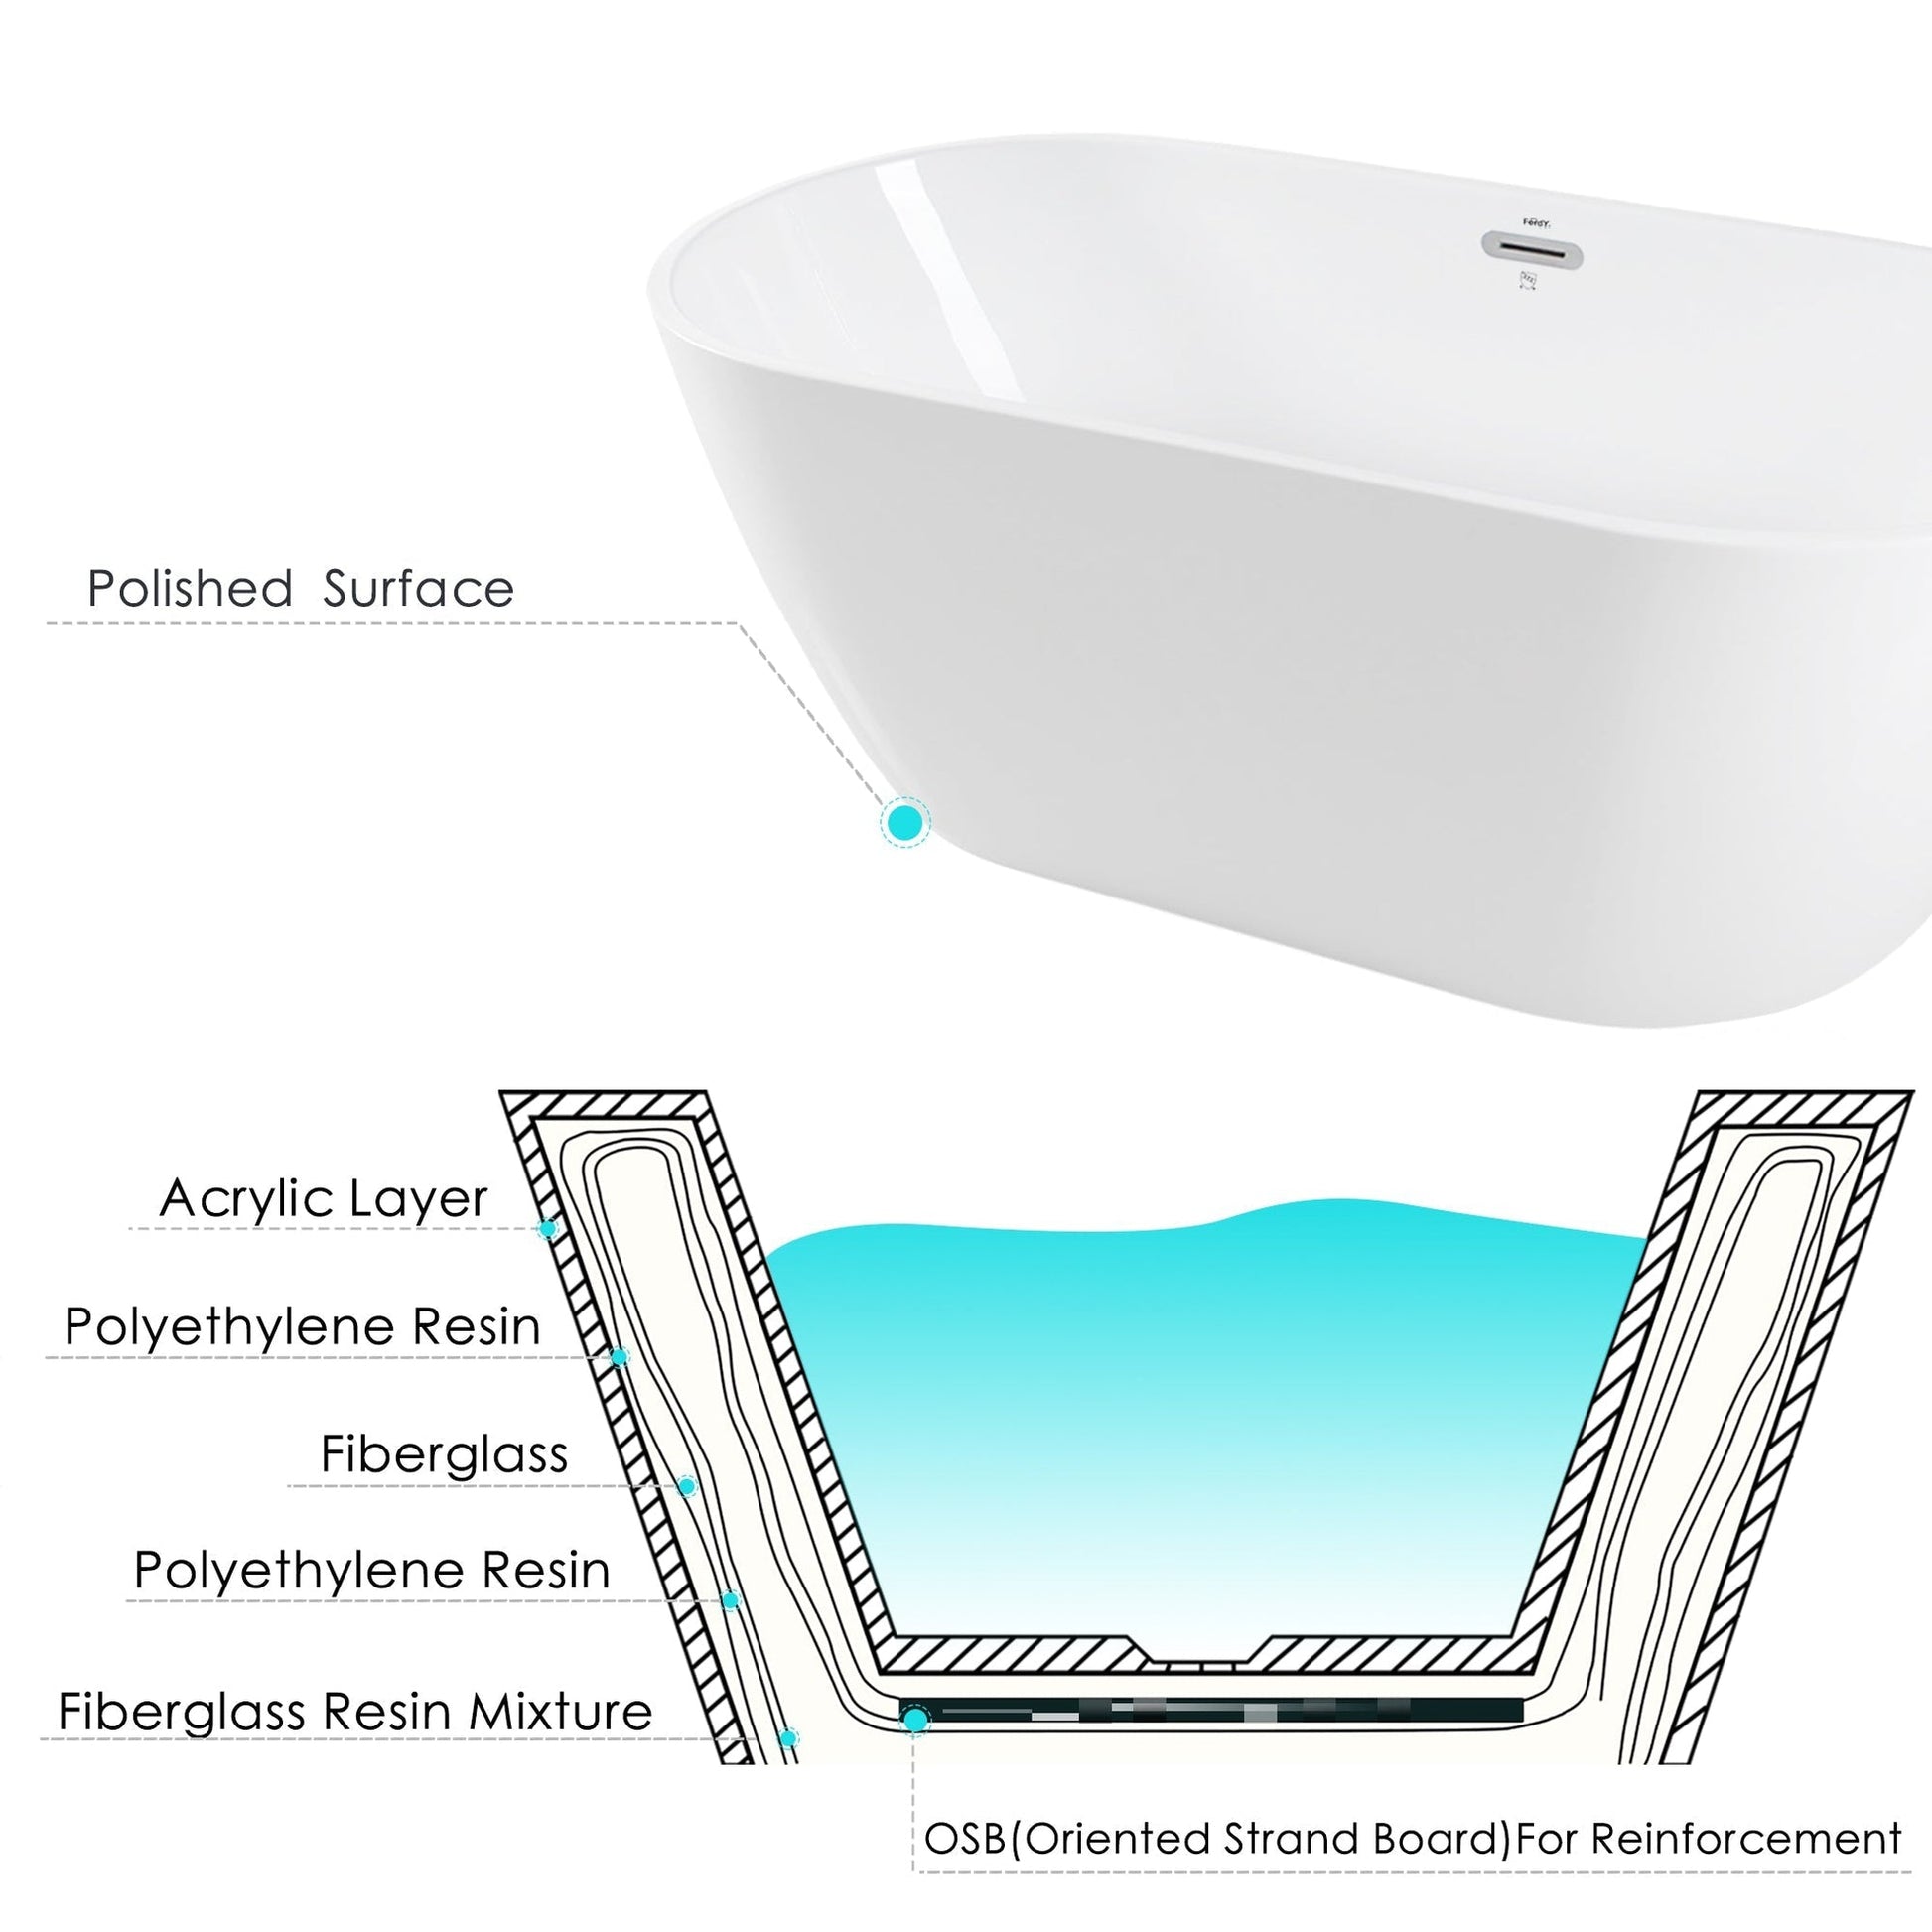 FerdY Bali 59" x 28" Oval Glossy White Acrylic Freestanding Double Slipper Soaking Bathtub With Chrome Drain and Overflow